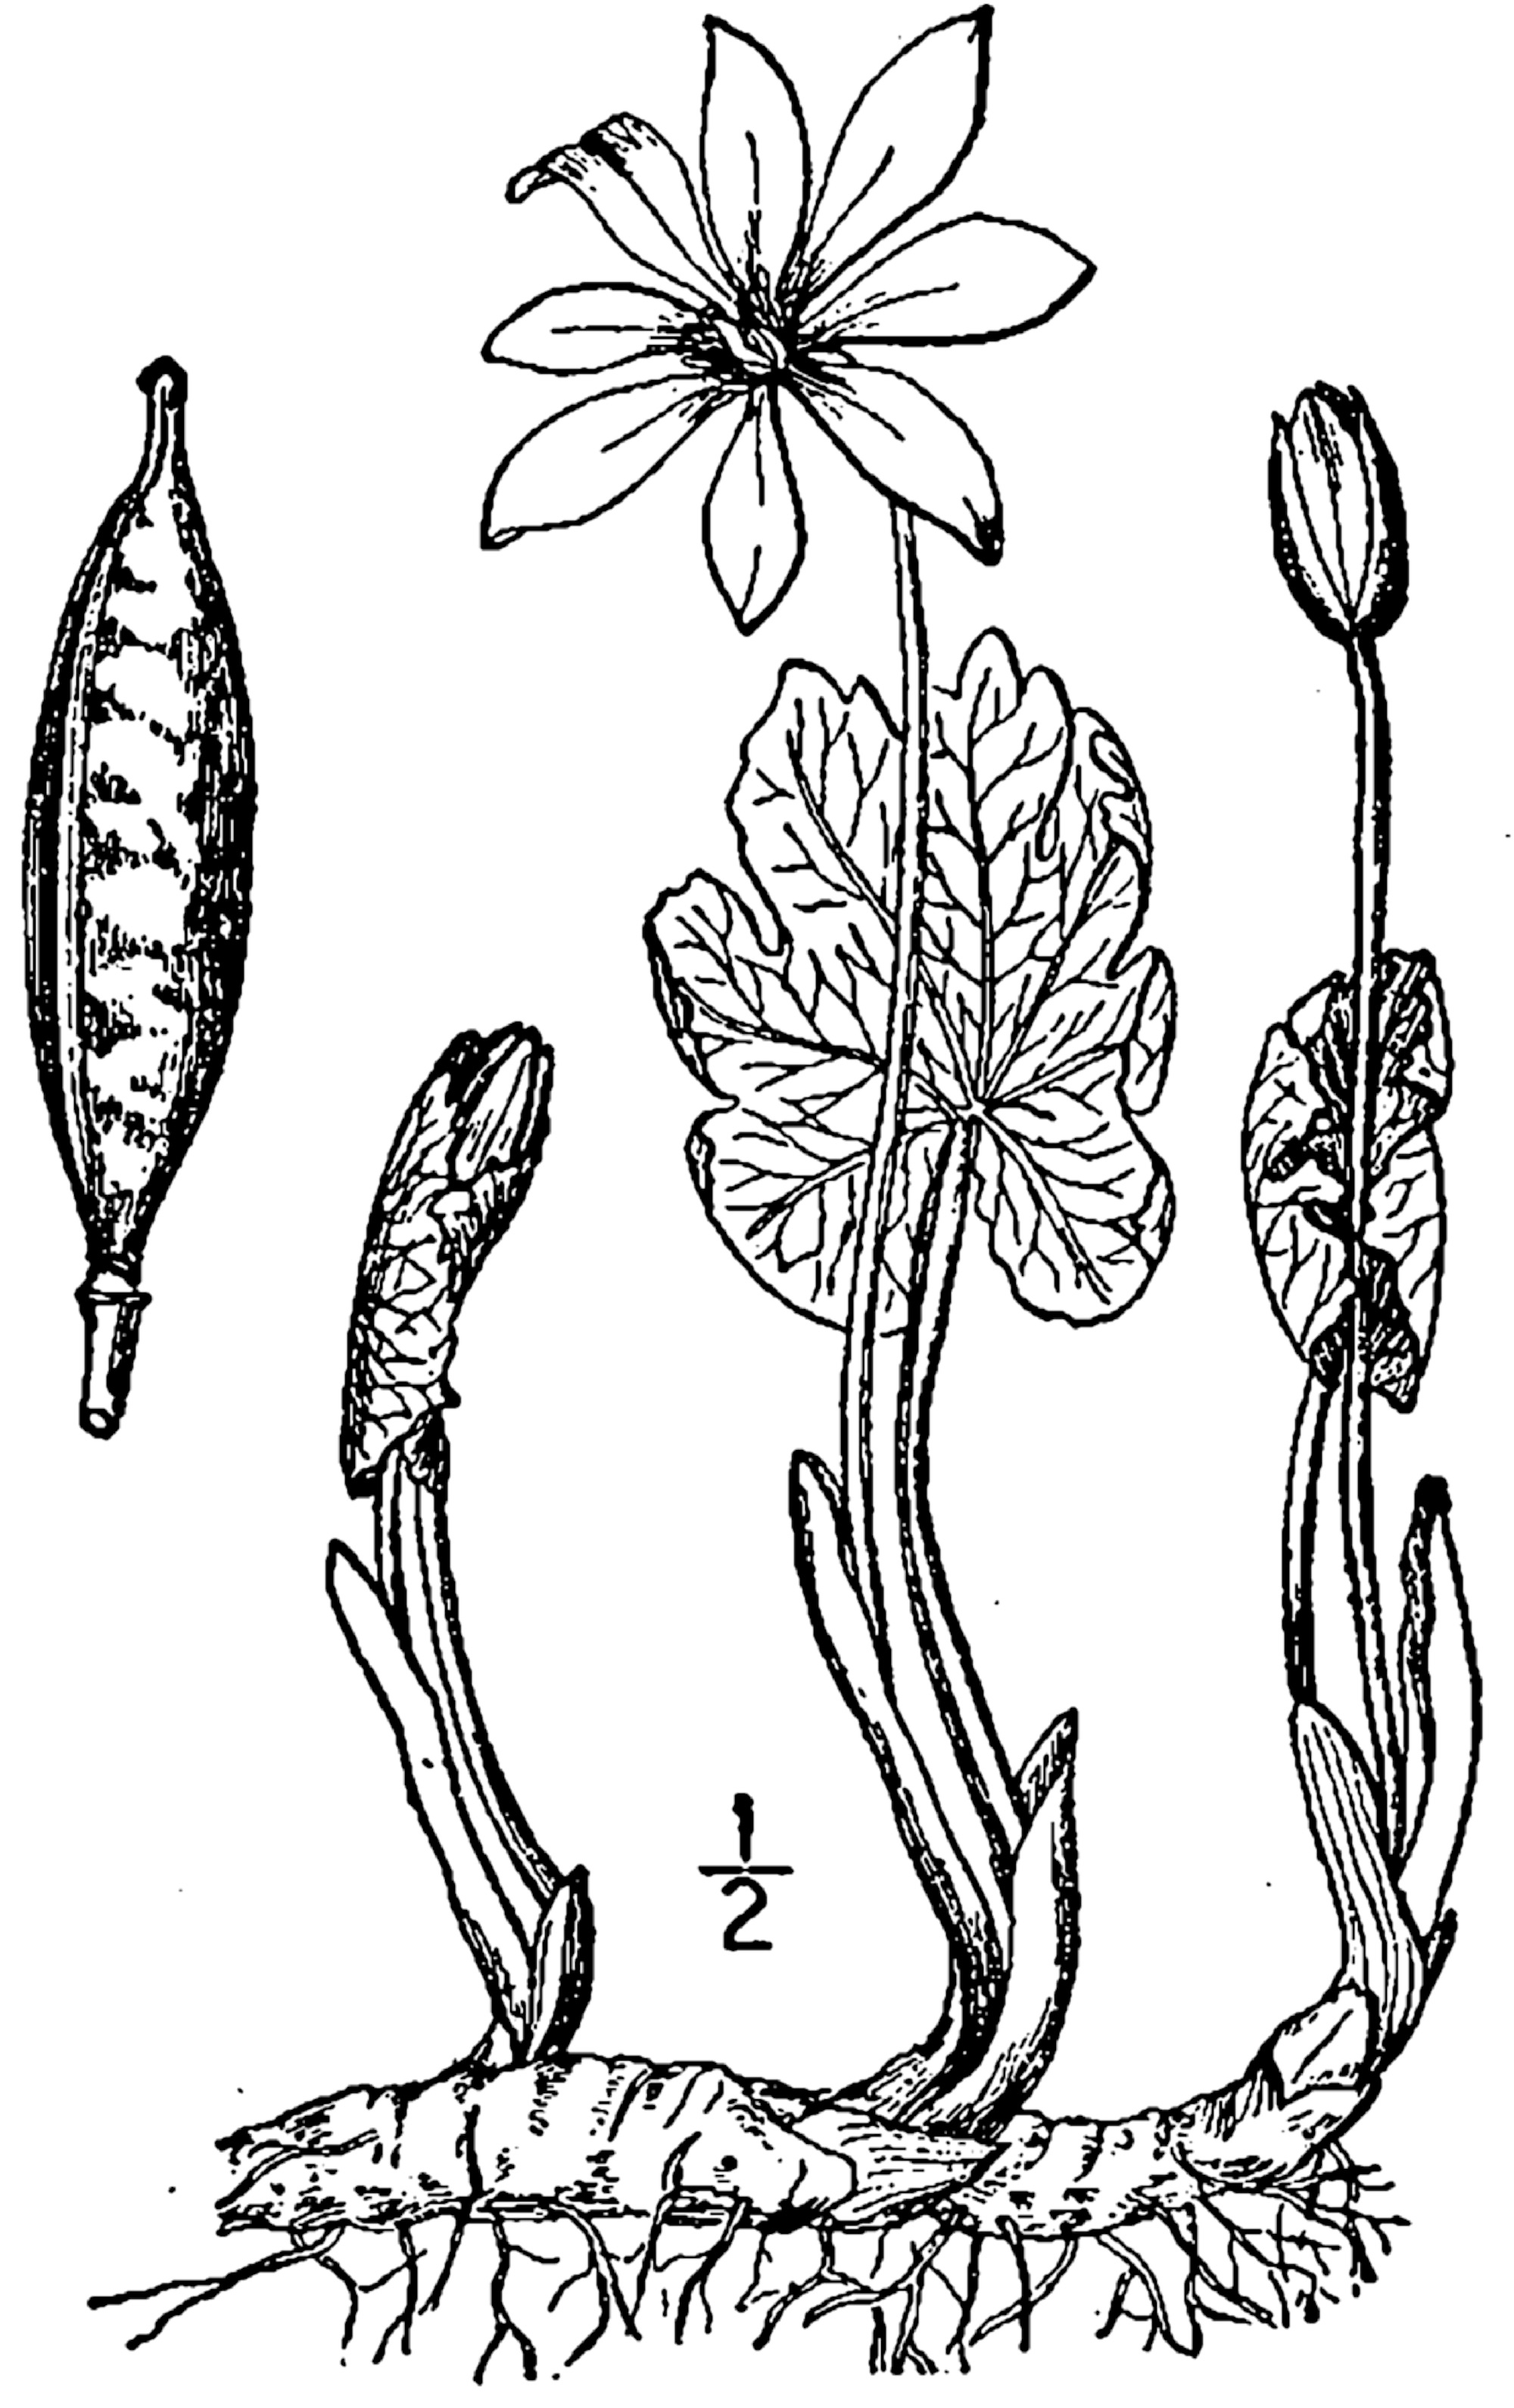 1913 drawing of Bloodroot.